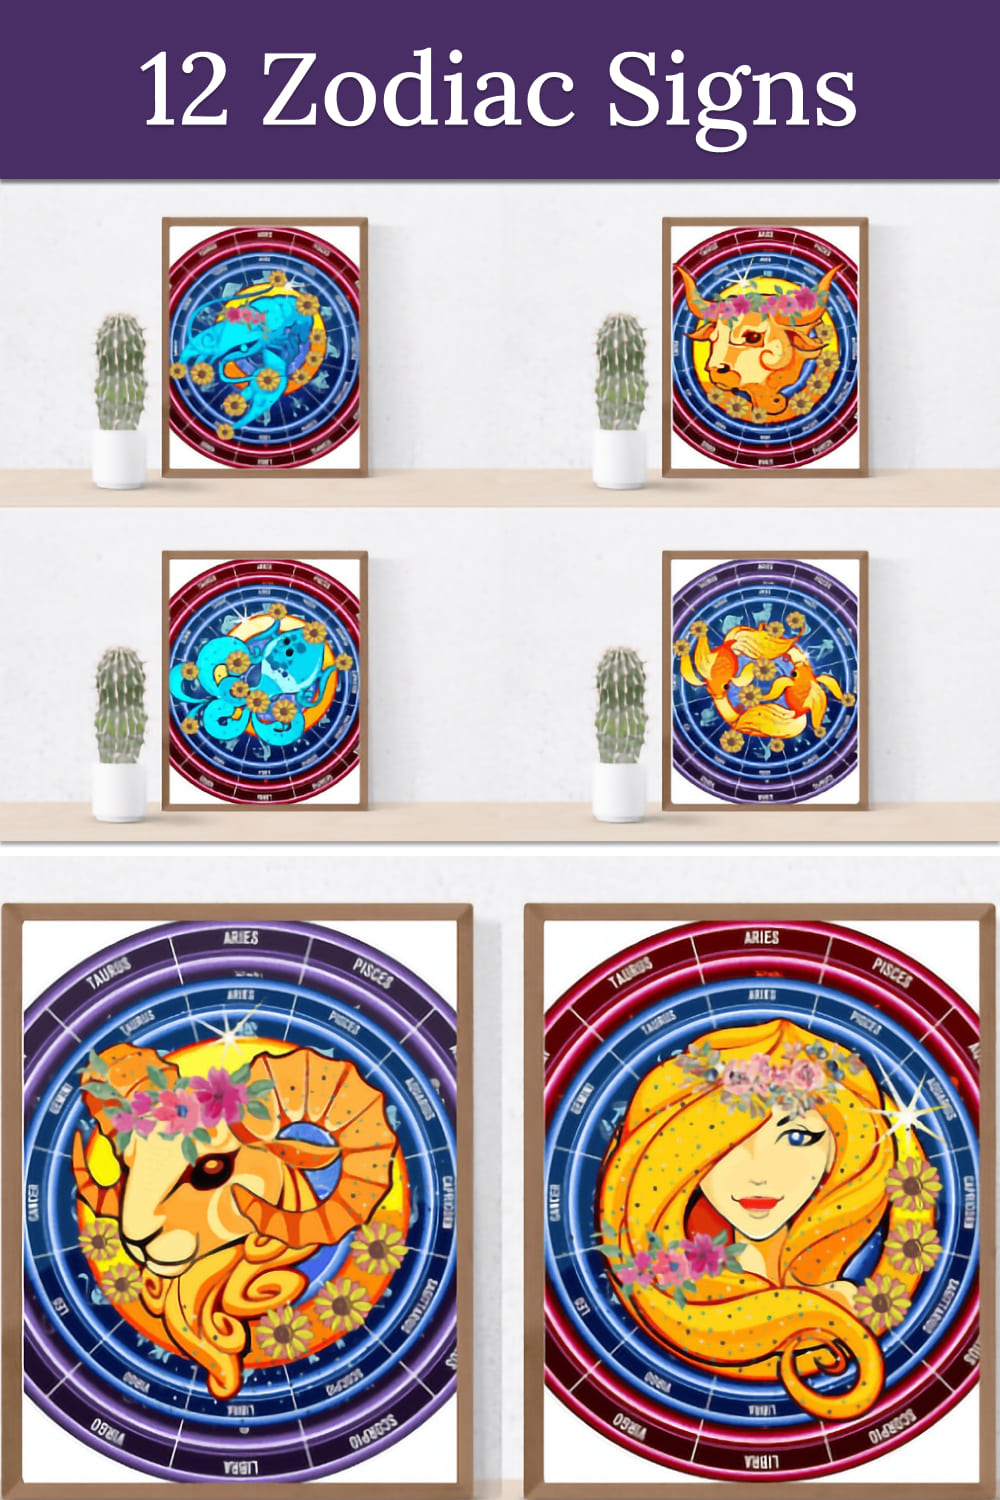 The pictures depict the colored signs of the zodiac to emphasize the interior.